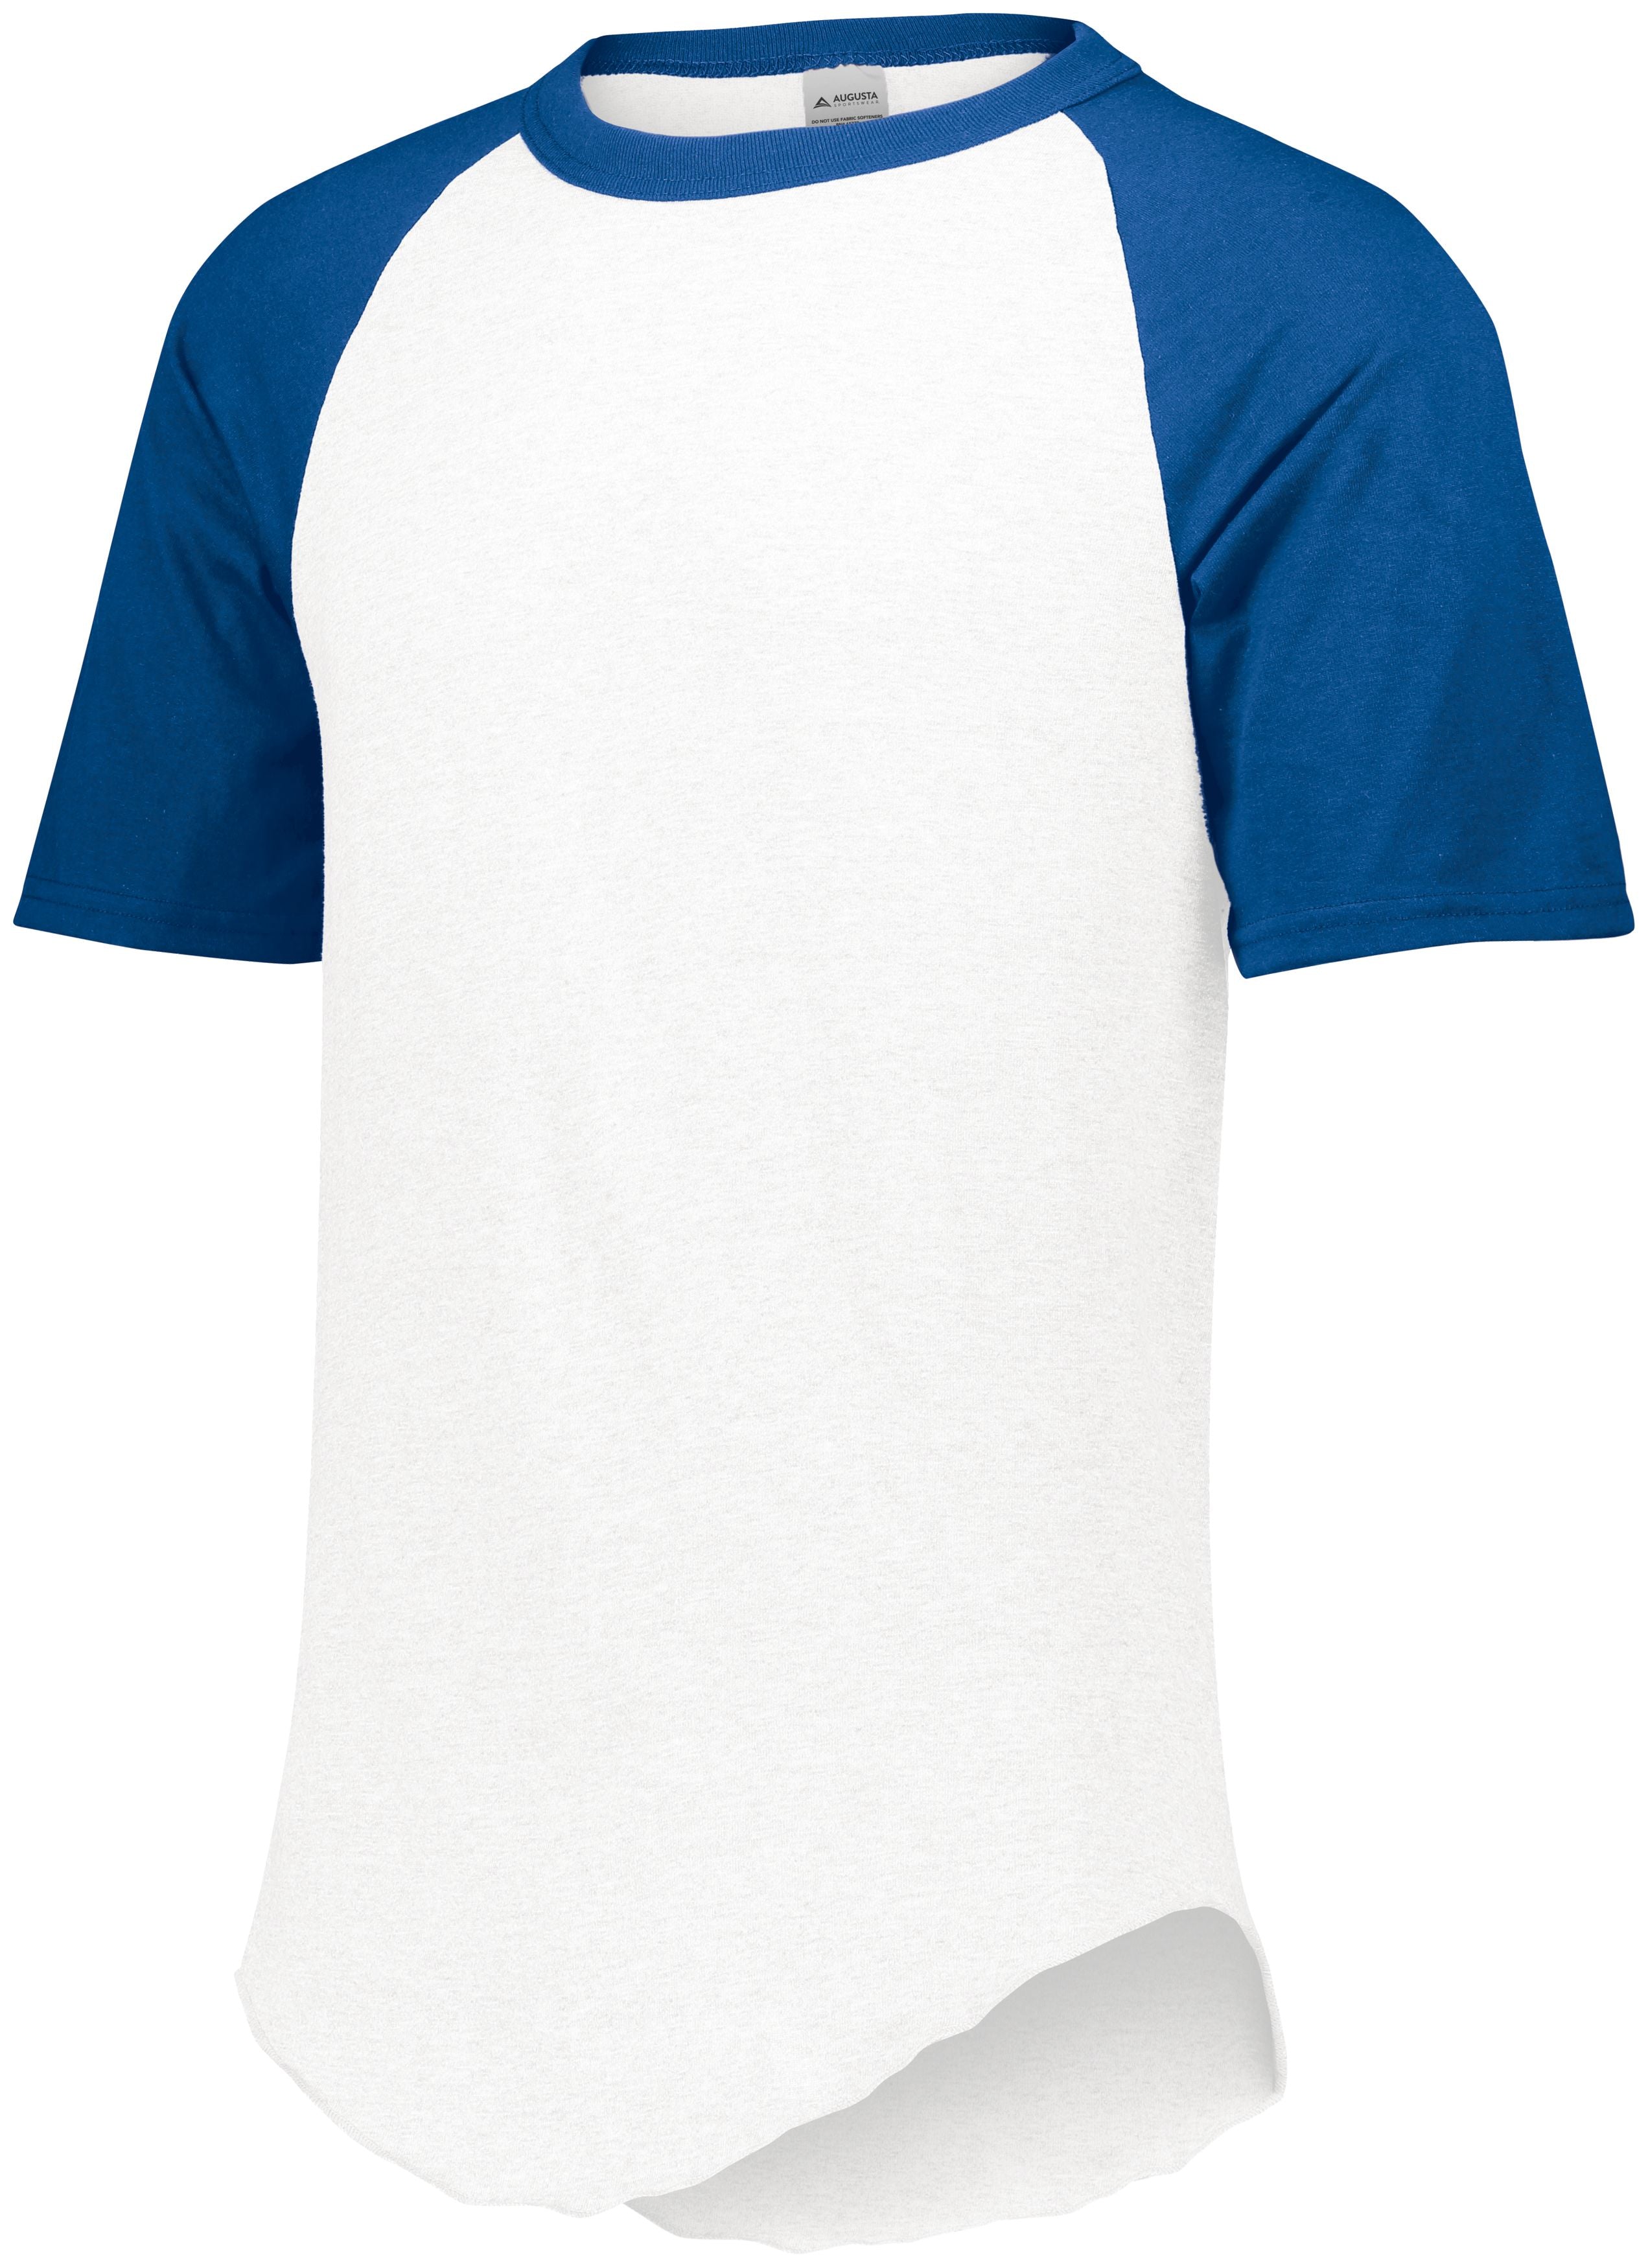 Augusta Sportswear Short Sleeve Baseball Jersey in White/Royal  -Part of the Adult, Adult-Jersey, Augusta-Products, Baseball, Shirts, All-Sports, All-Sports-1 product lines at KanaleyCreations.com